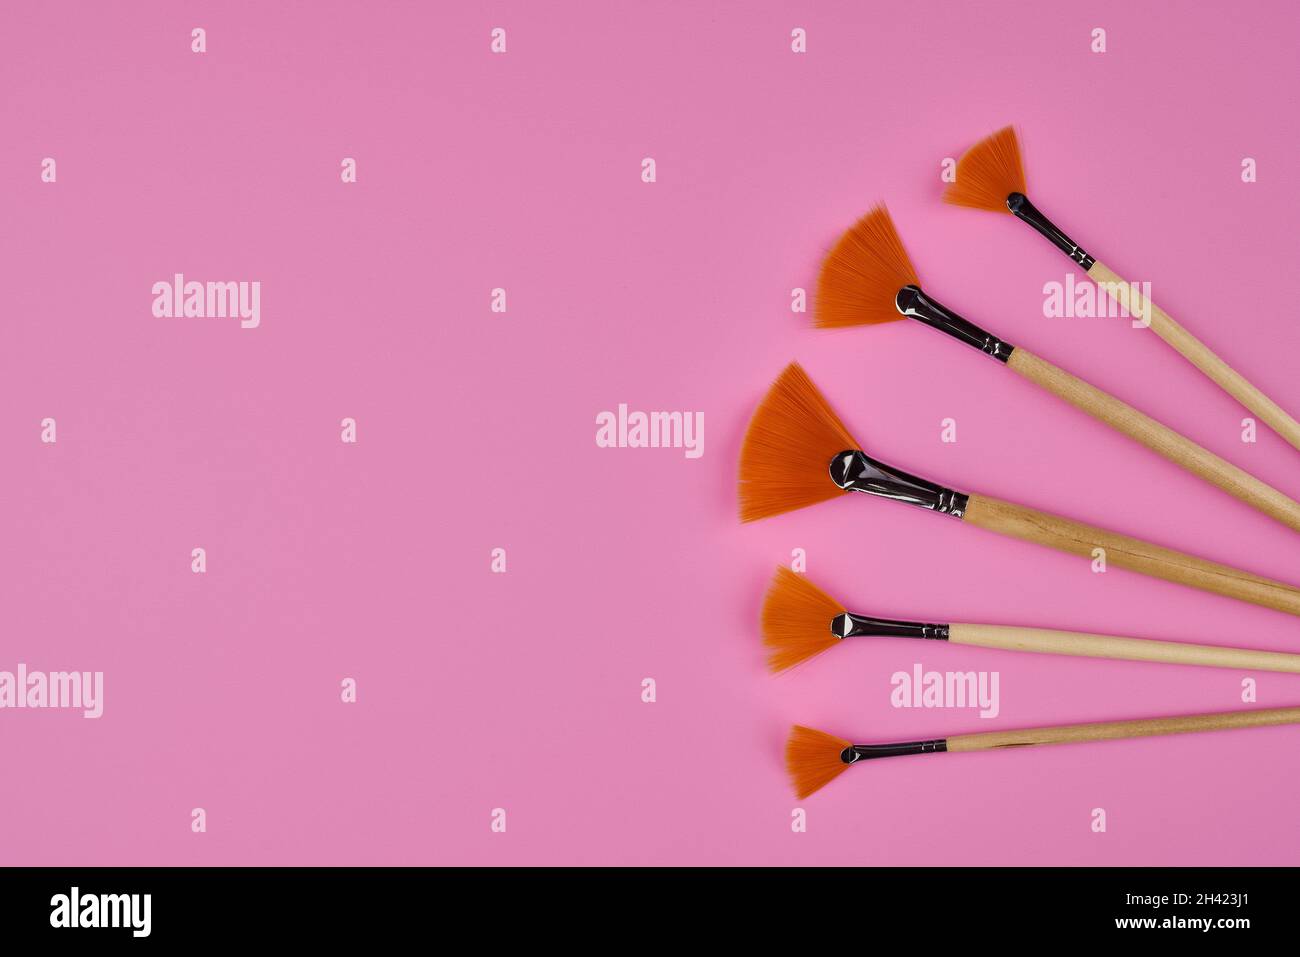 Six different sizes of artist orange bristled fan brushes on a pink background with copy space Stock Photo